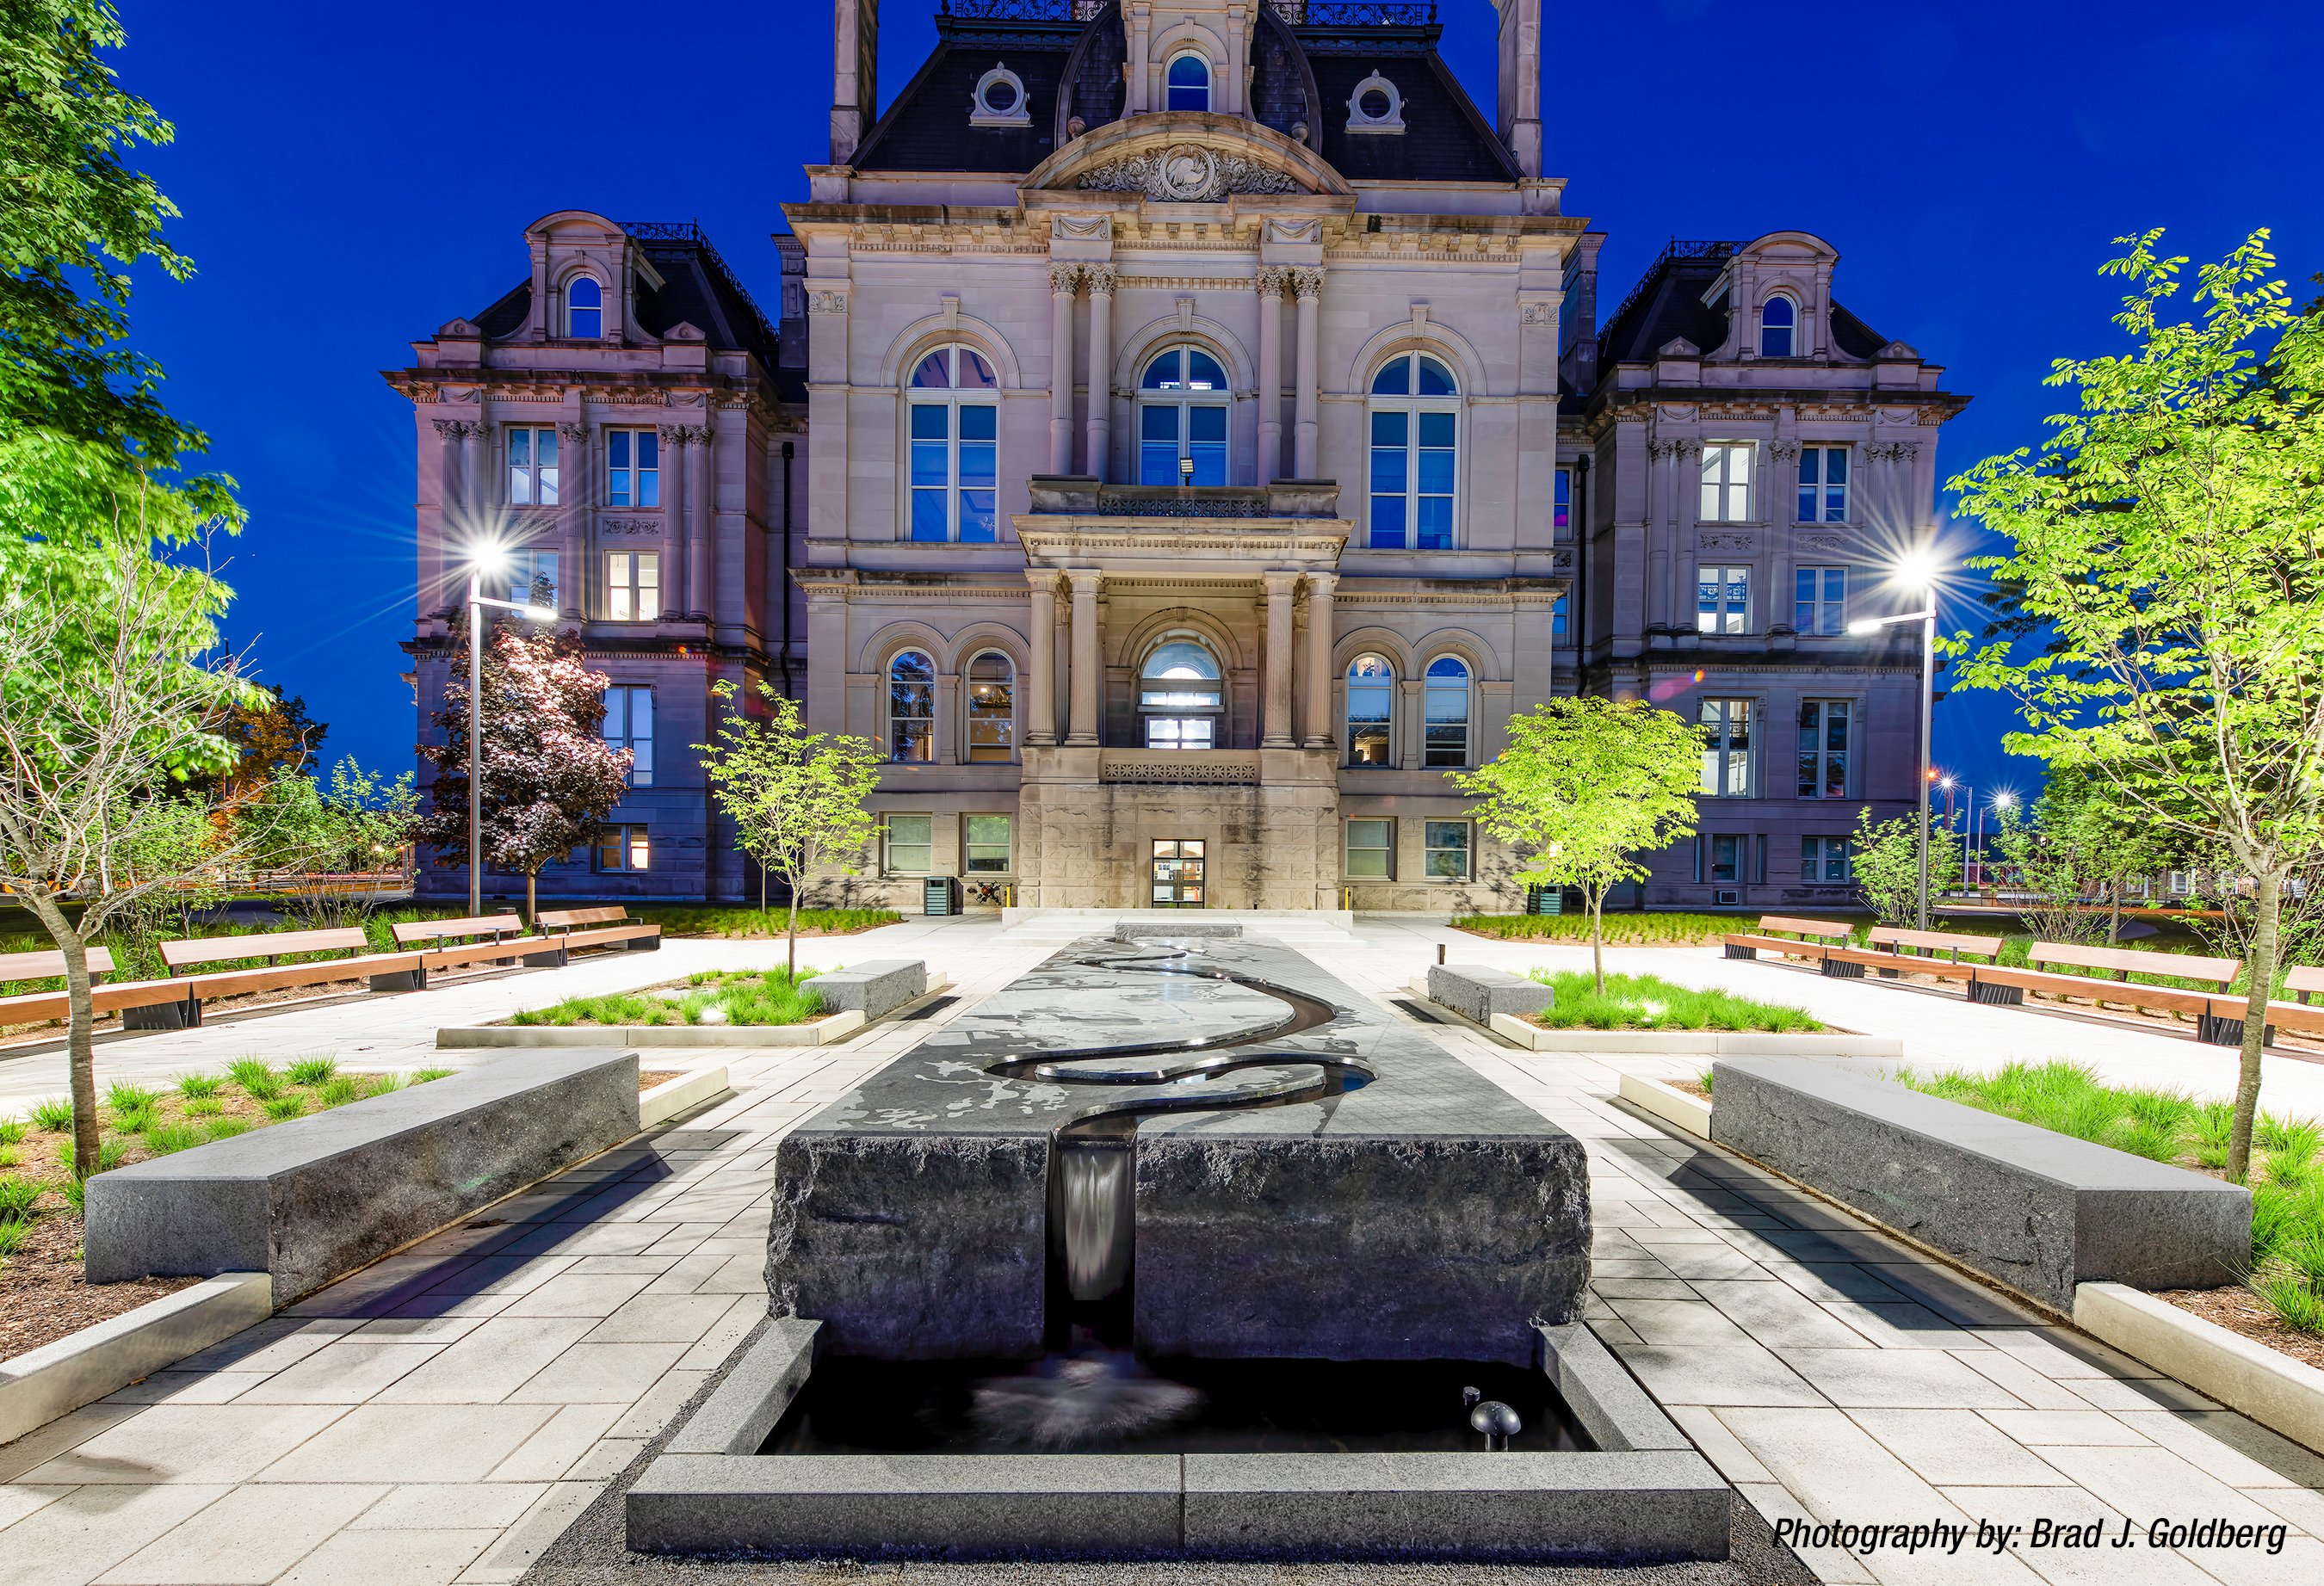 A nighttime view of city hall in front on the black granite fountain sculpture